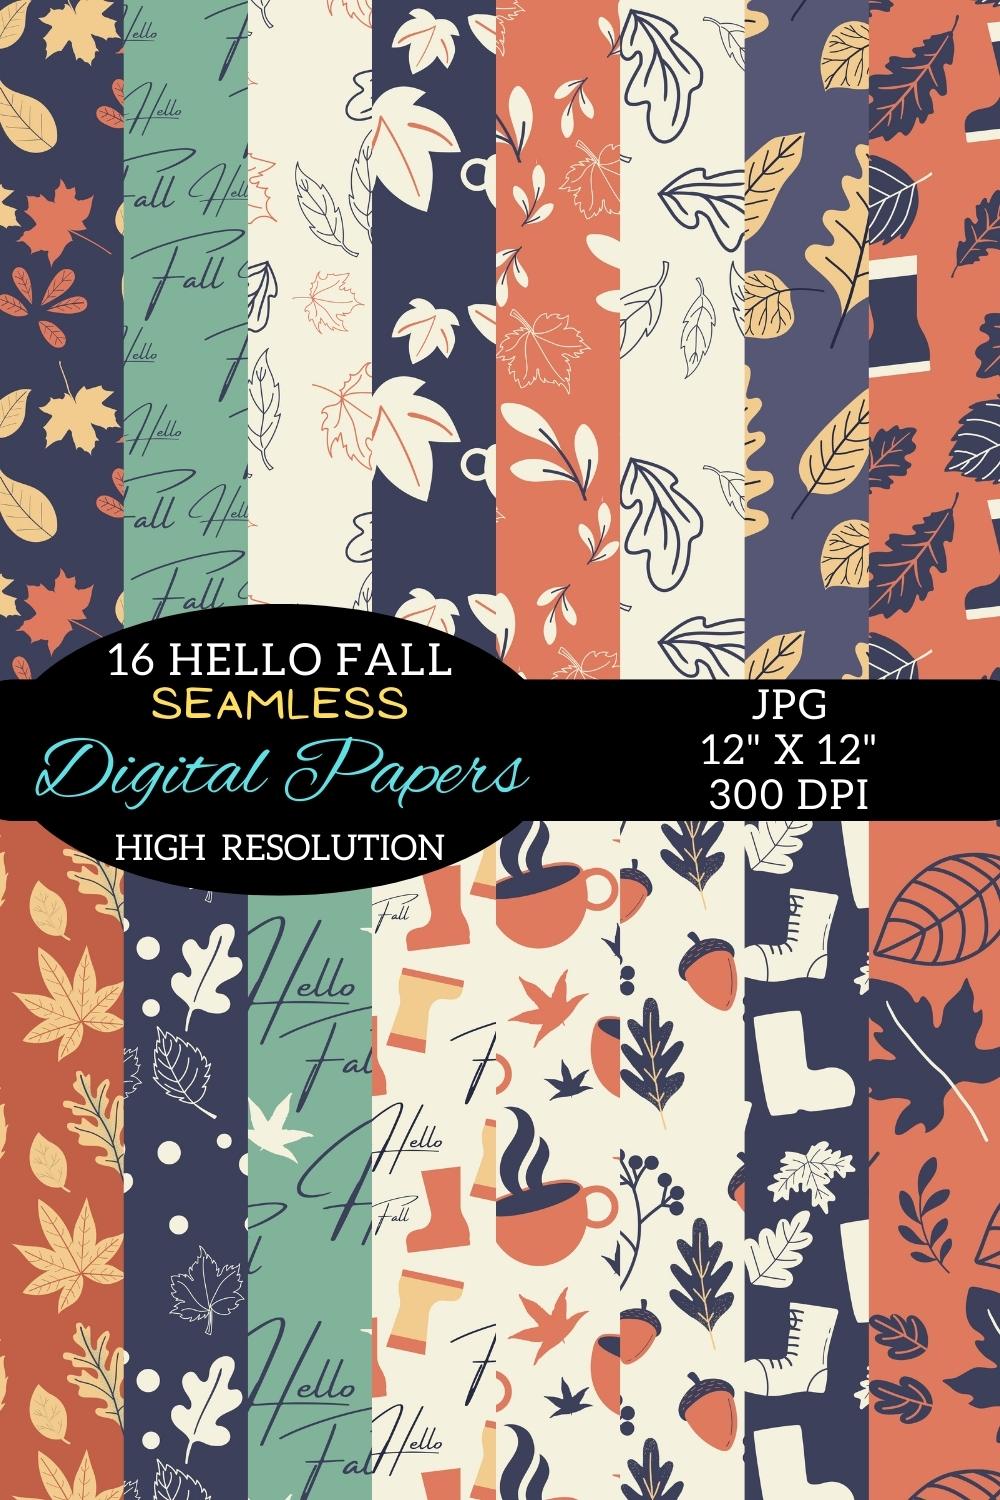 A selection of elegant autumn-themed background patterns.